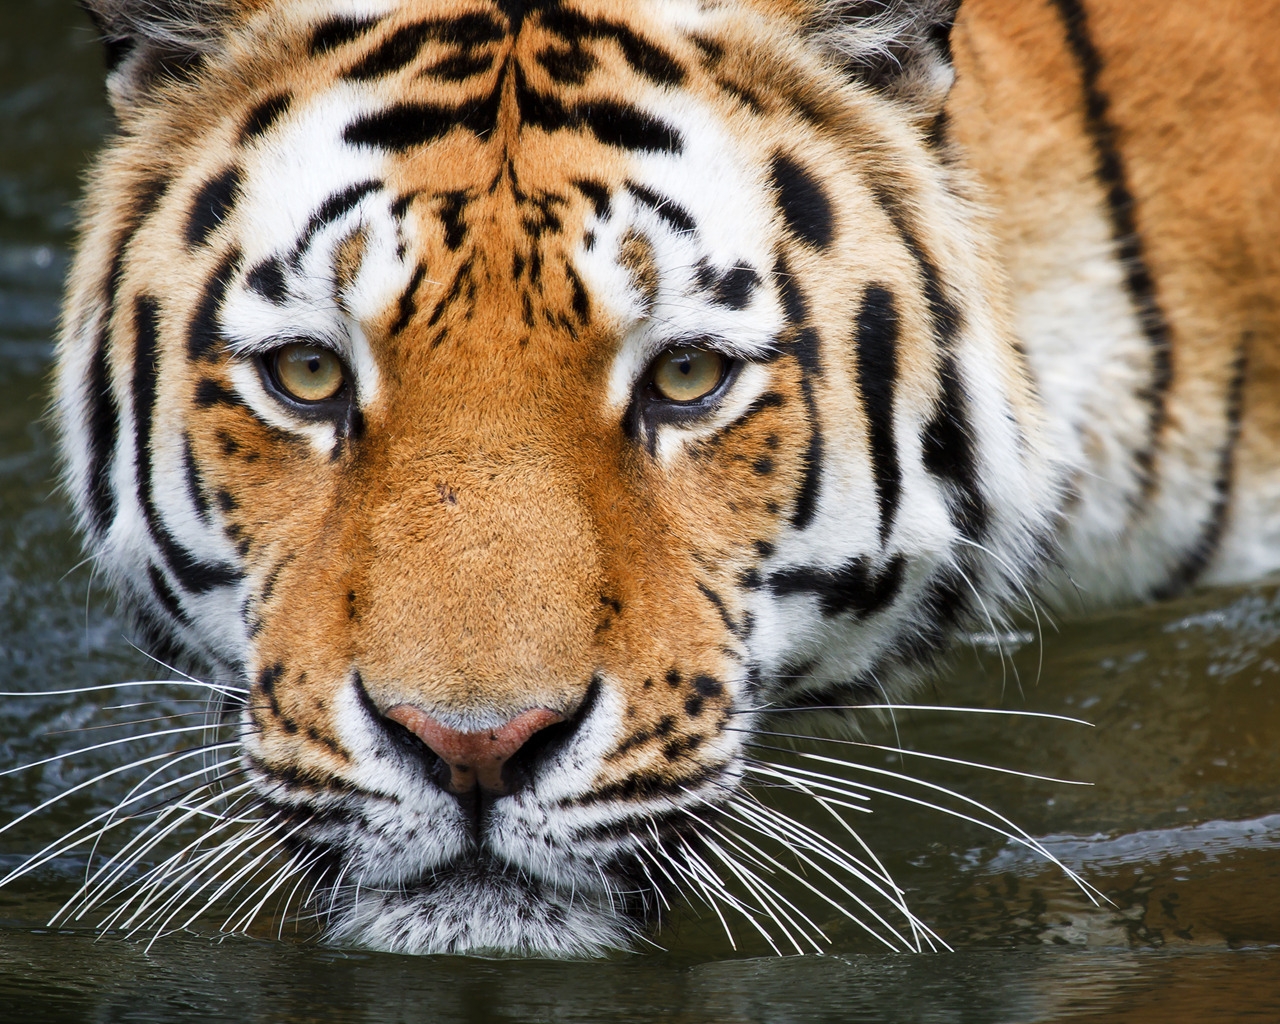 Bathing Tiger for 1280 x 1024 resolution